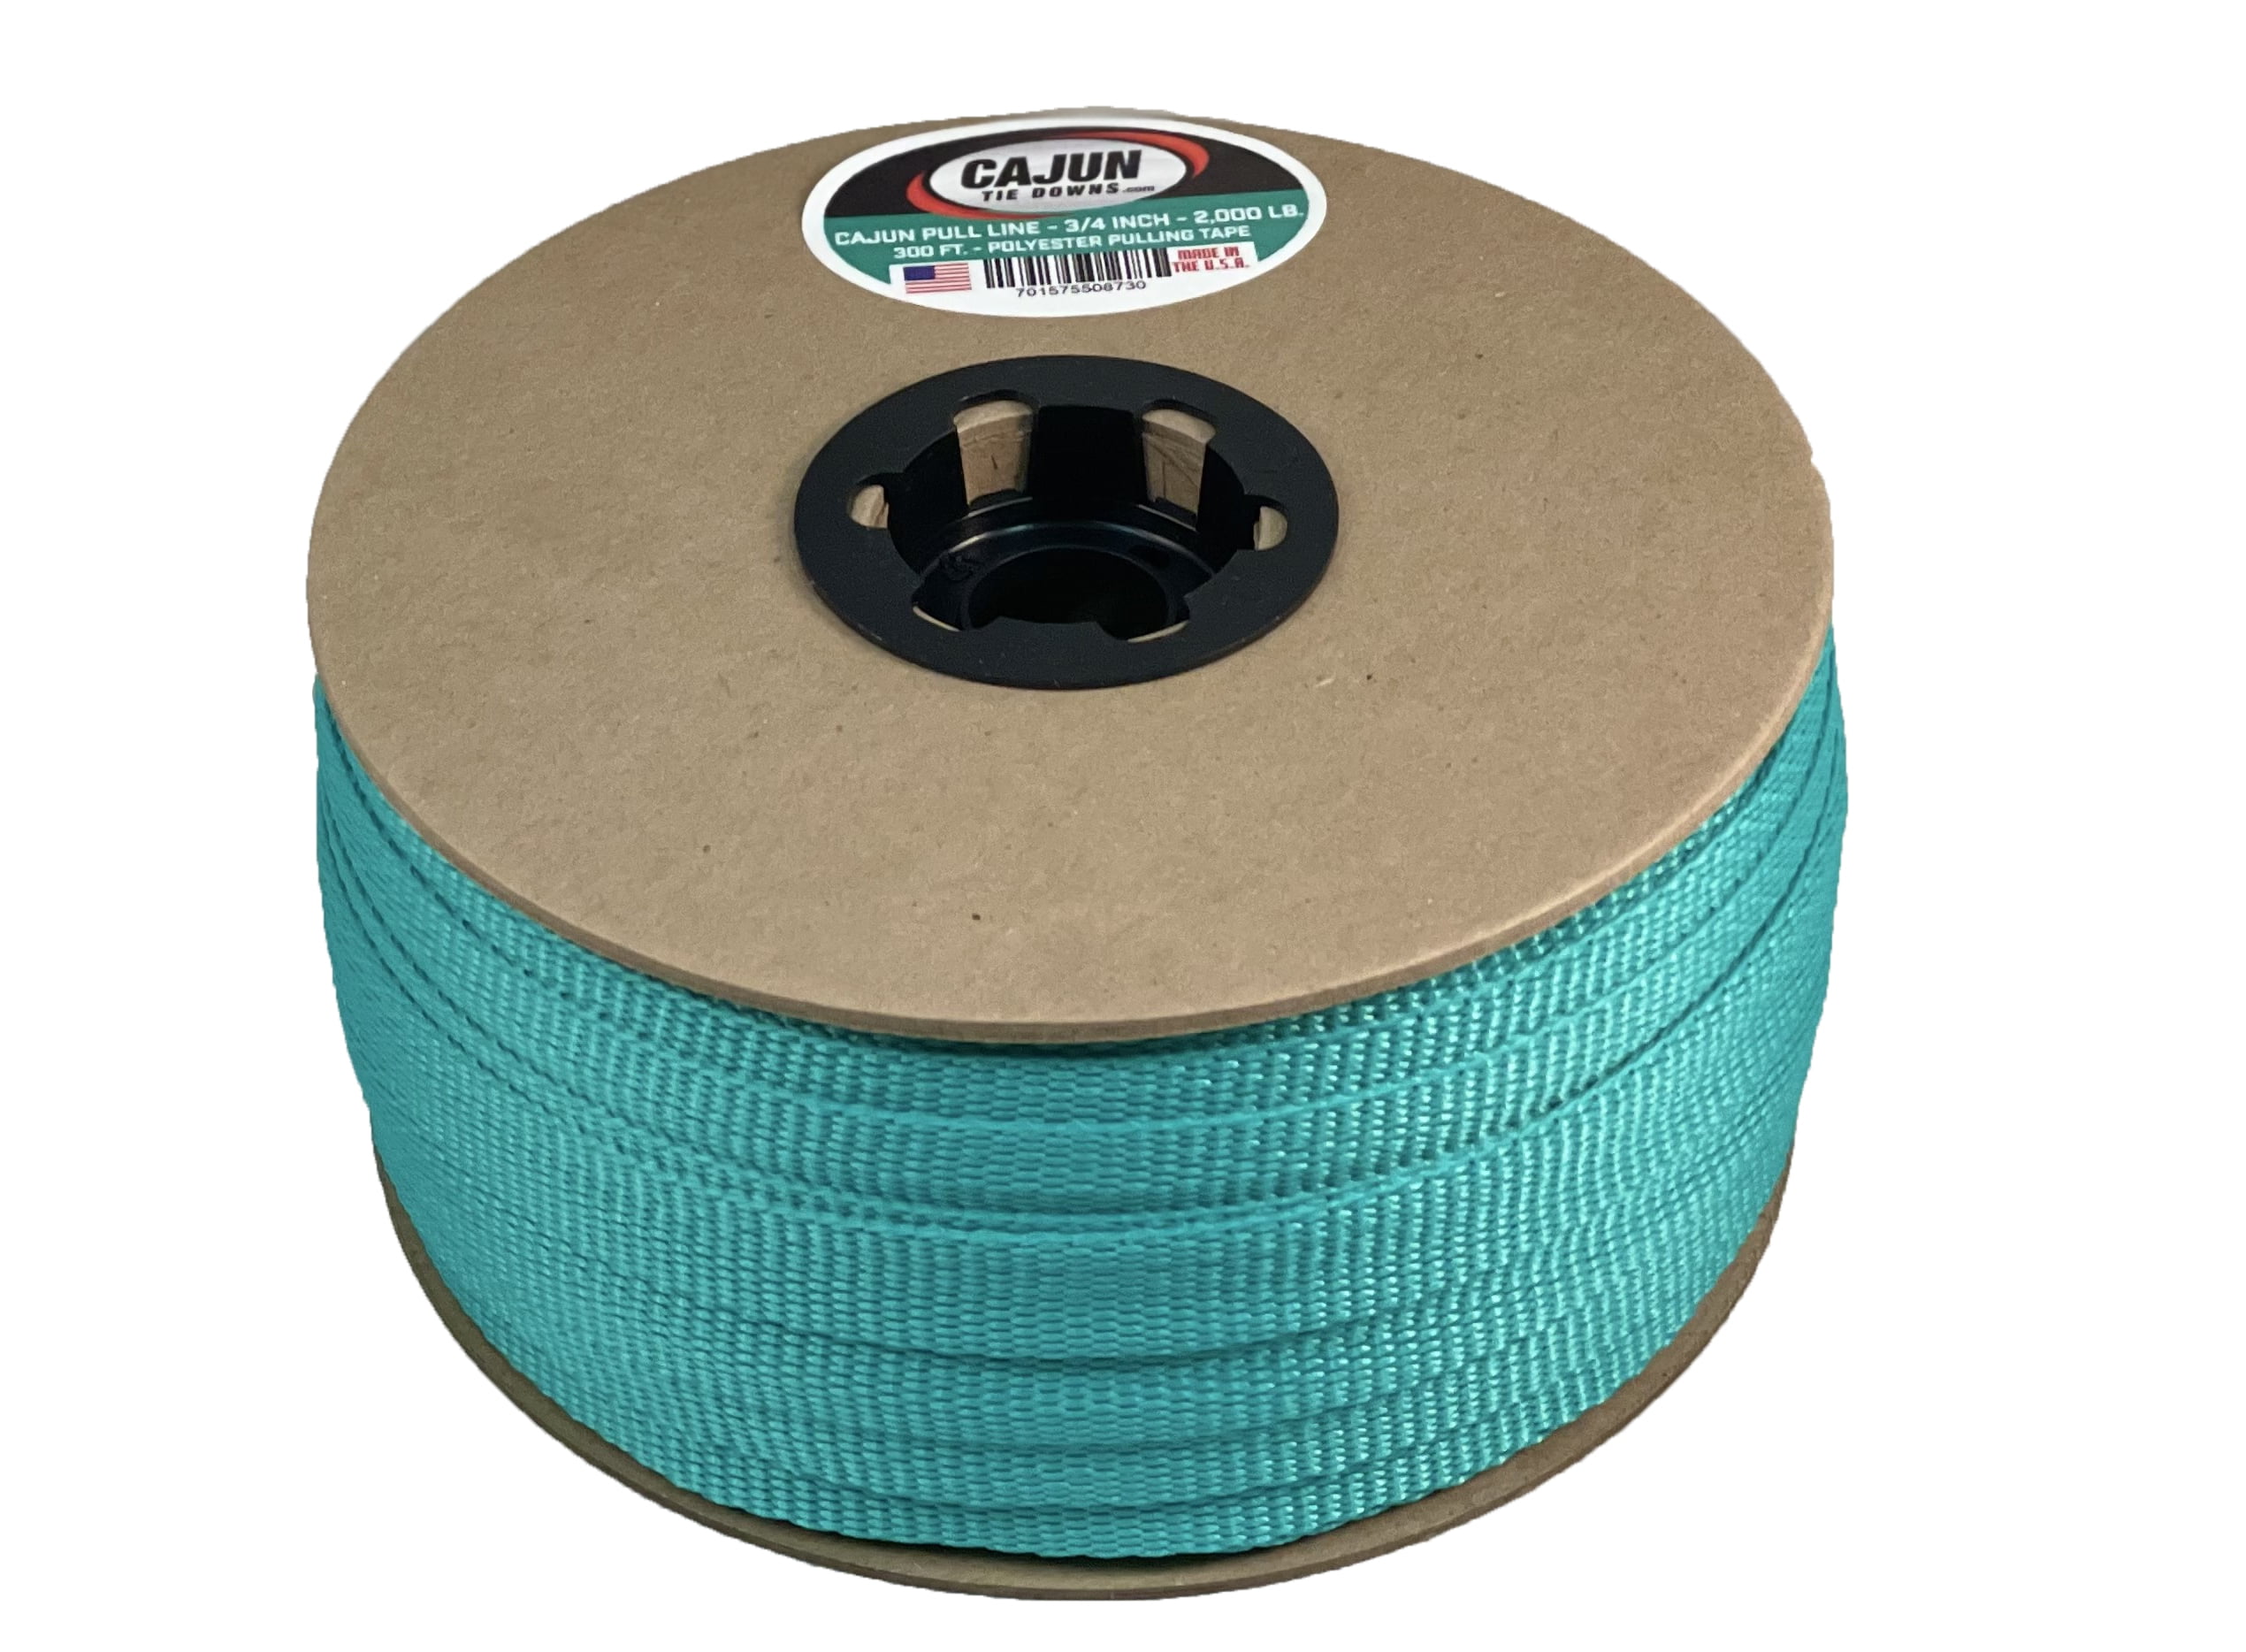 Cajun Mule Line - 5/8 Inch X 350' - Turquoise - 1,500 lb. - Pull Tape -  Polyester Pulling Tape - Made in USA 